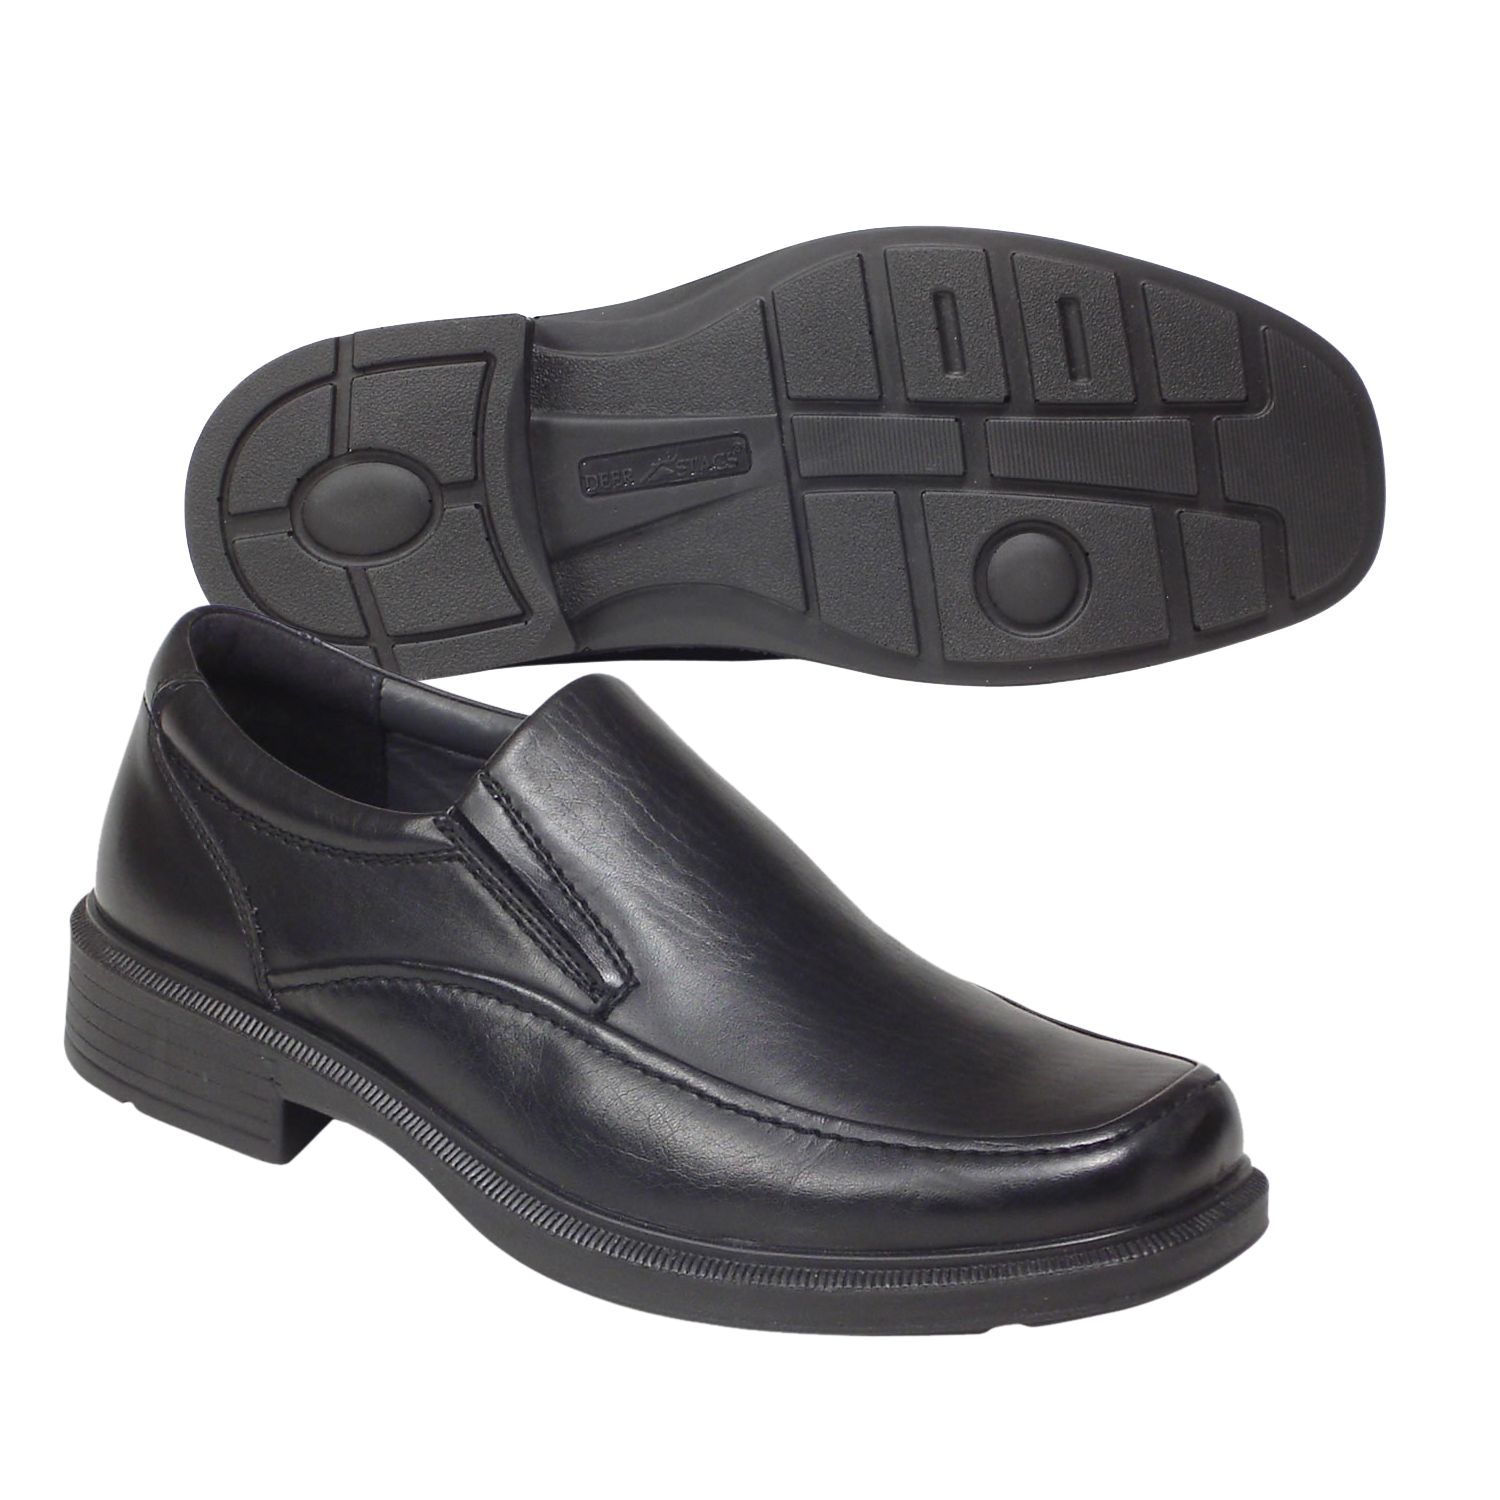 deer stags non slip shoes